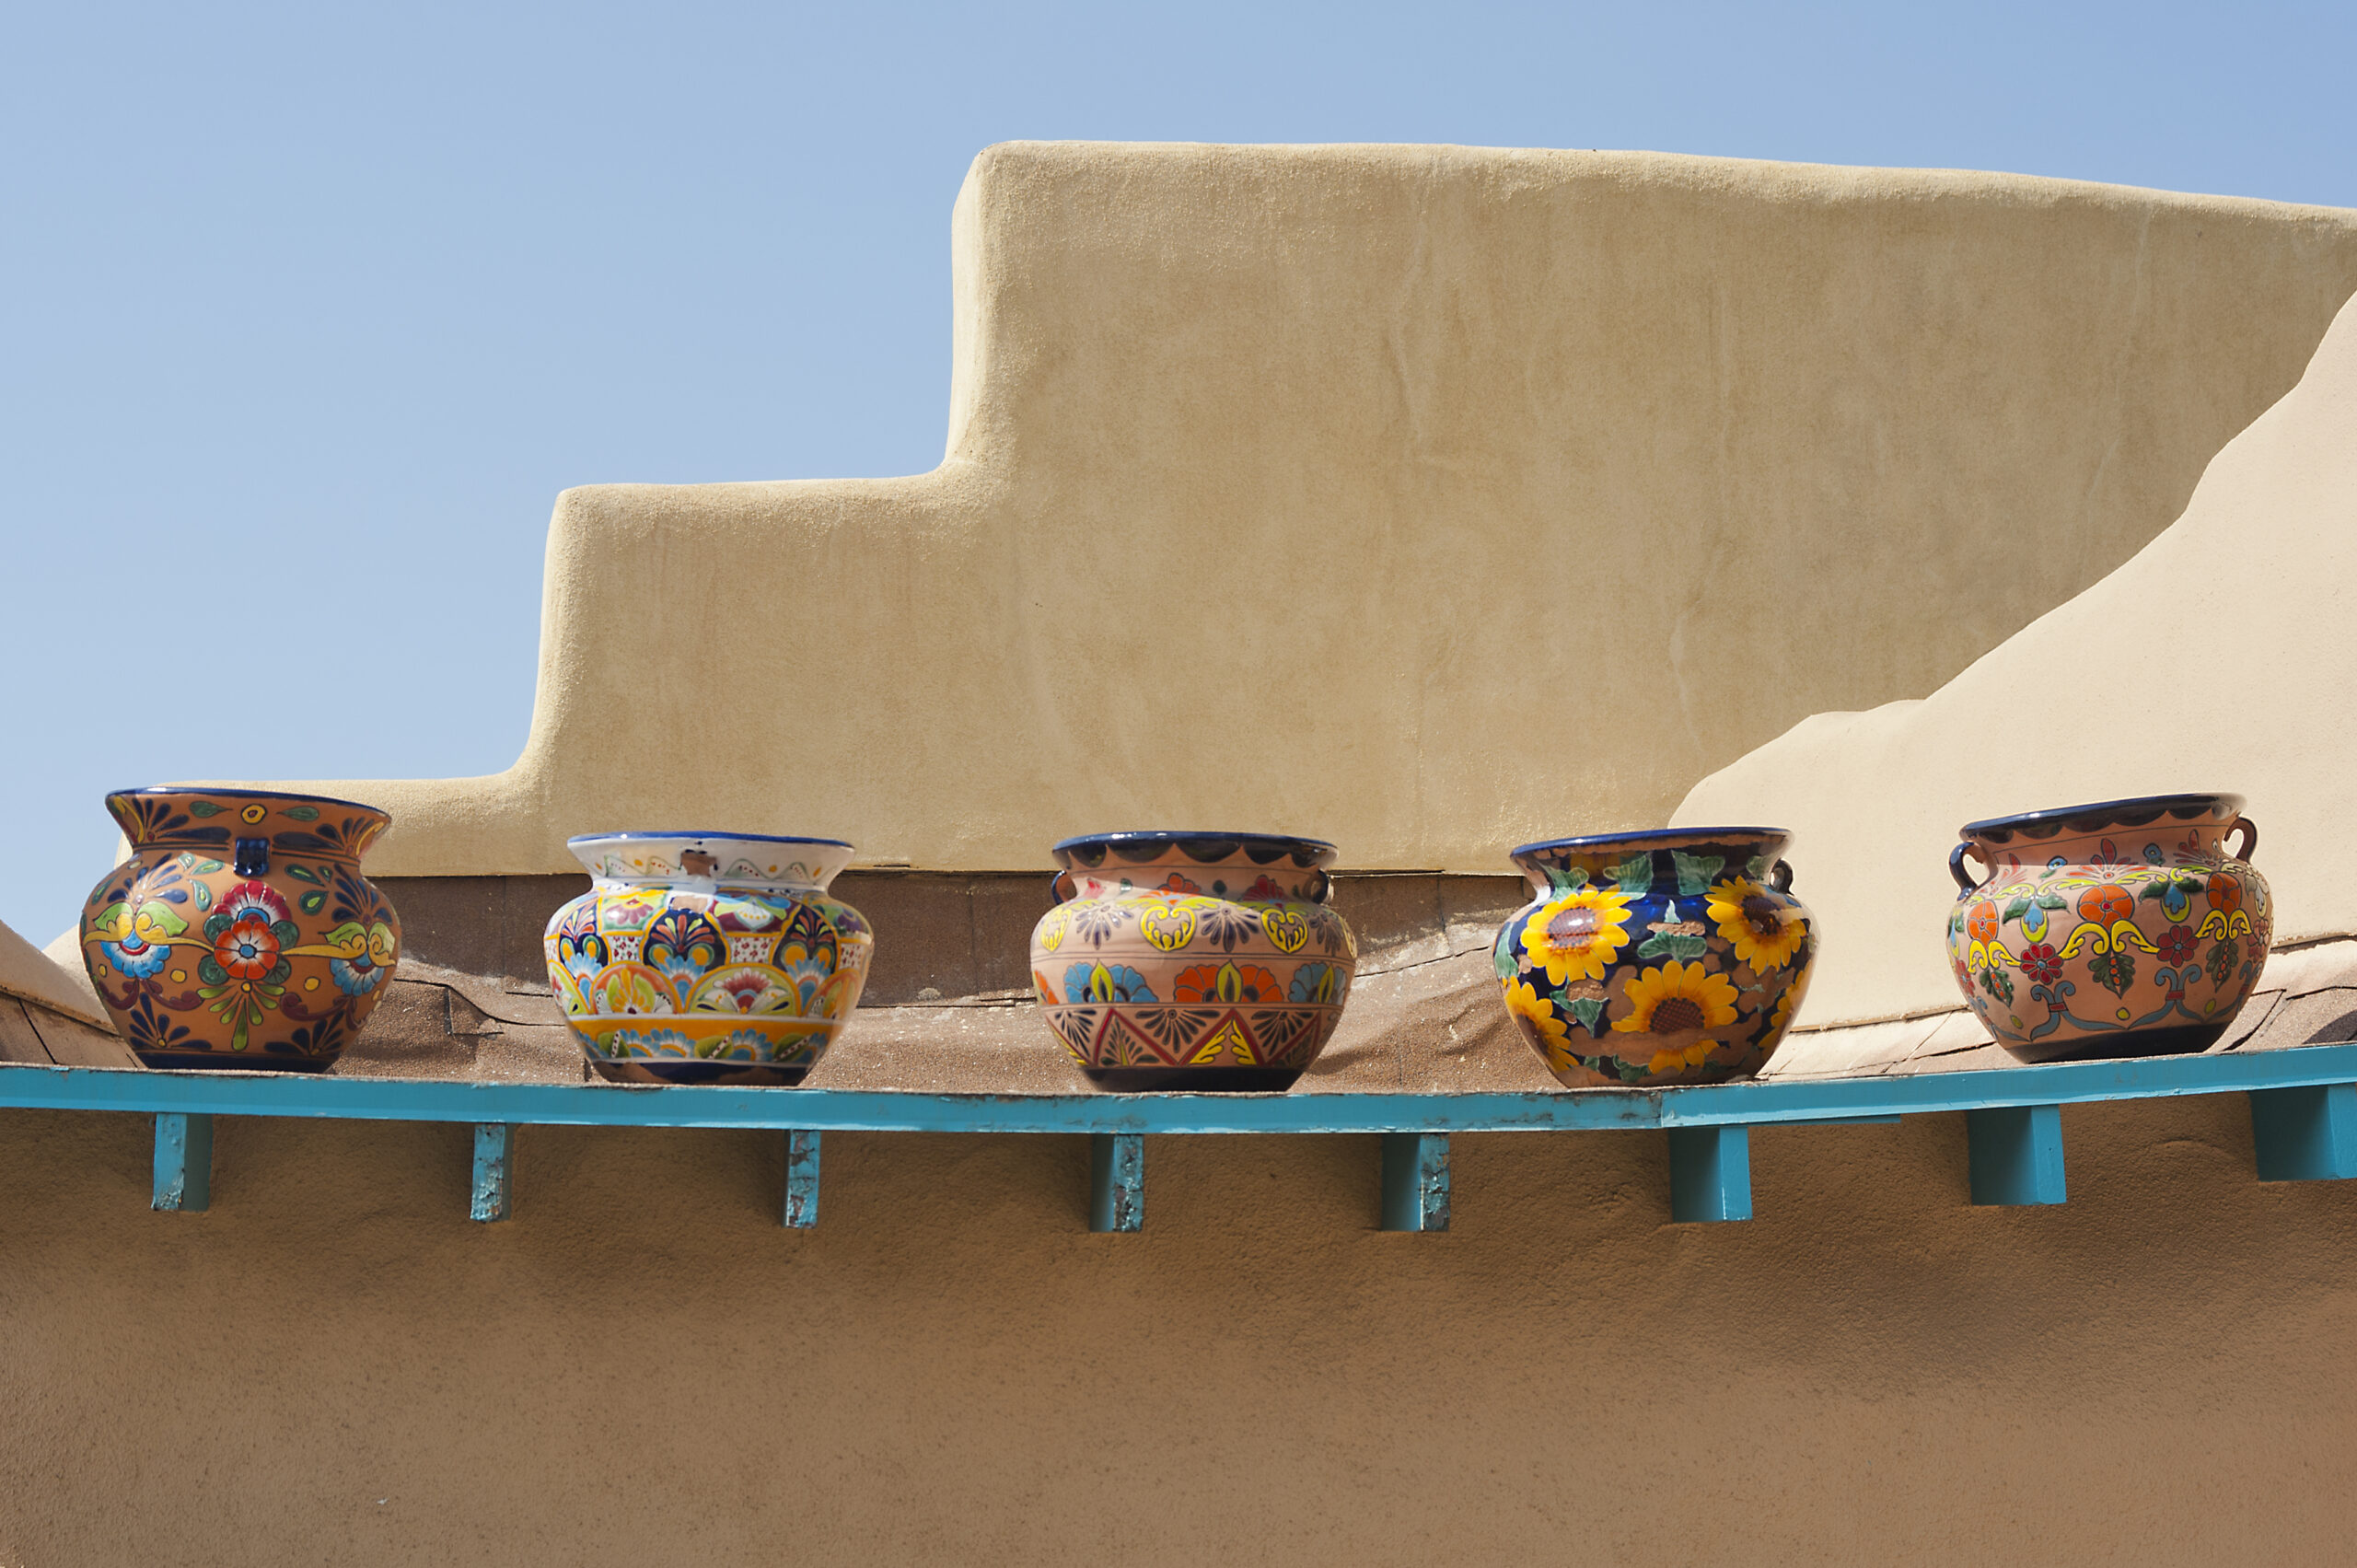 Pottery atop an adobe building in Taos (Photo Credit: chapin31 / iStock)